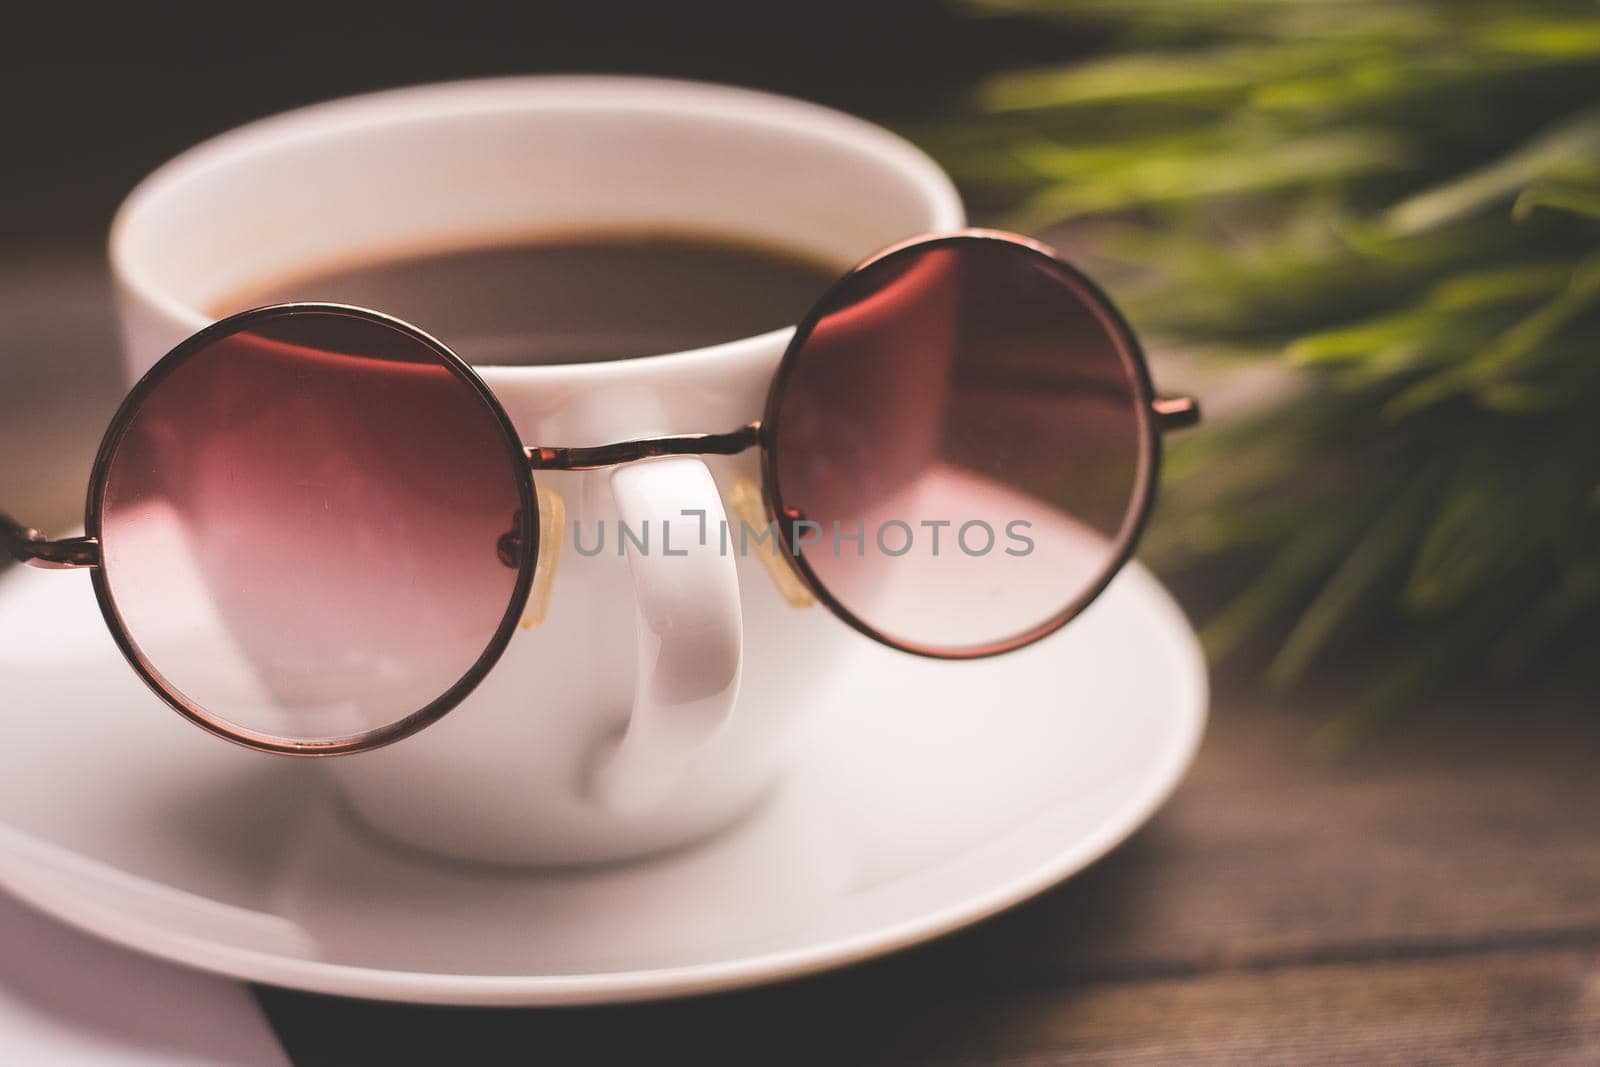 cup of coffee with glasses on a saucer and a wooden table flower in a pot in the background by SHOTPRIME